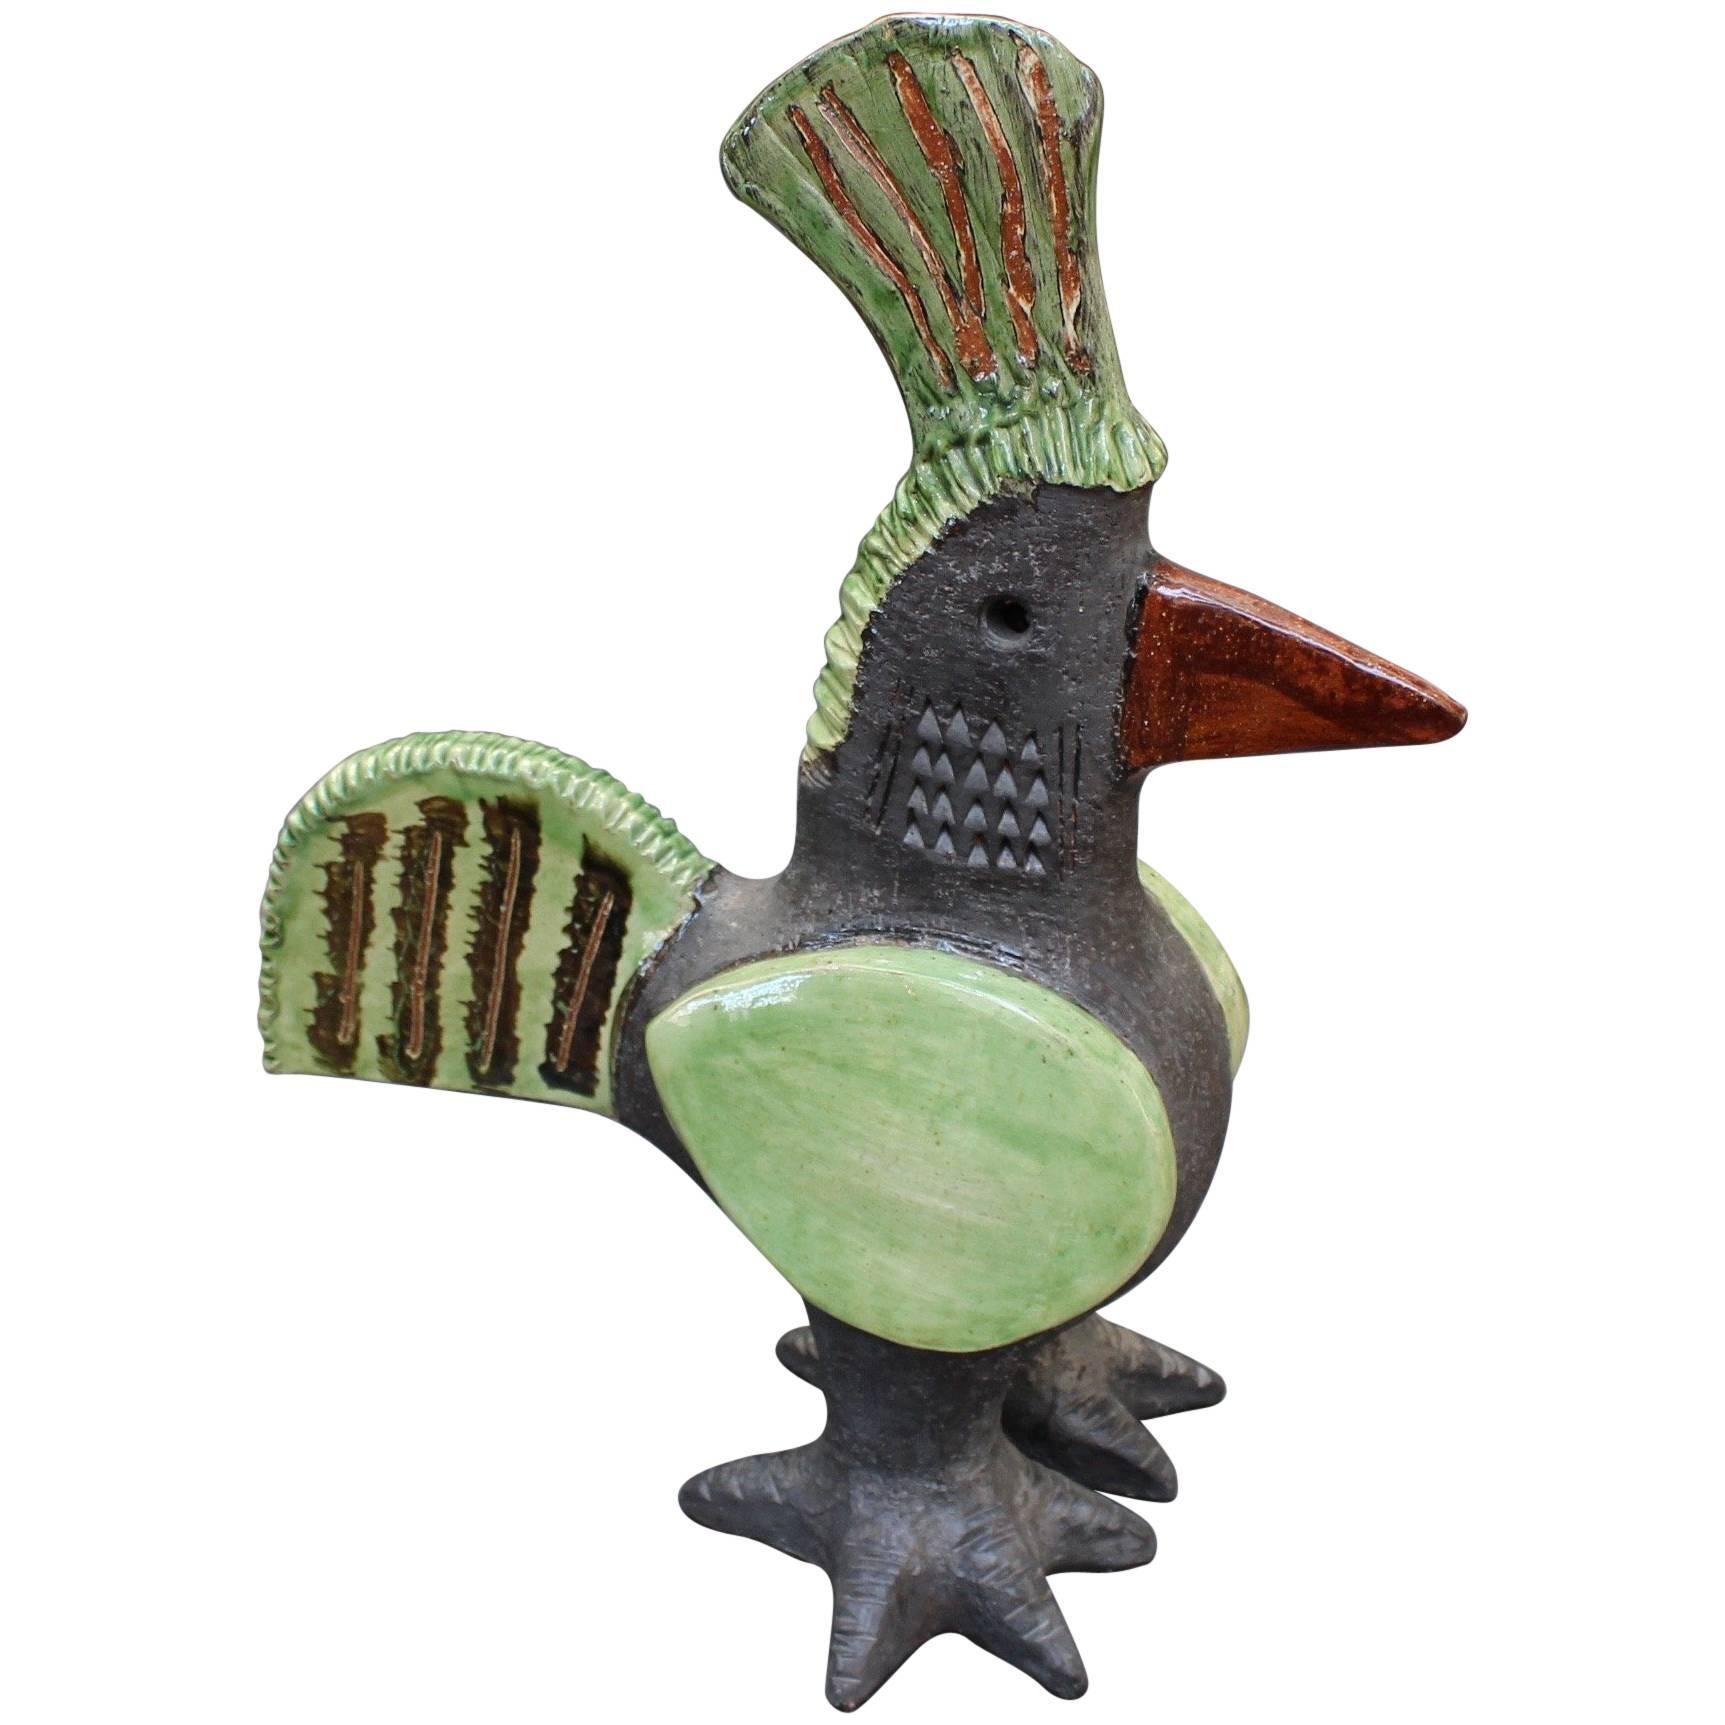 Ceramic French Rooster Sculpture by Dominique Pouchain, circa 1990s